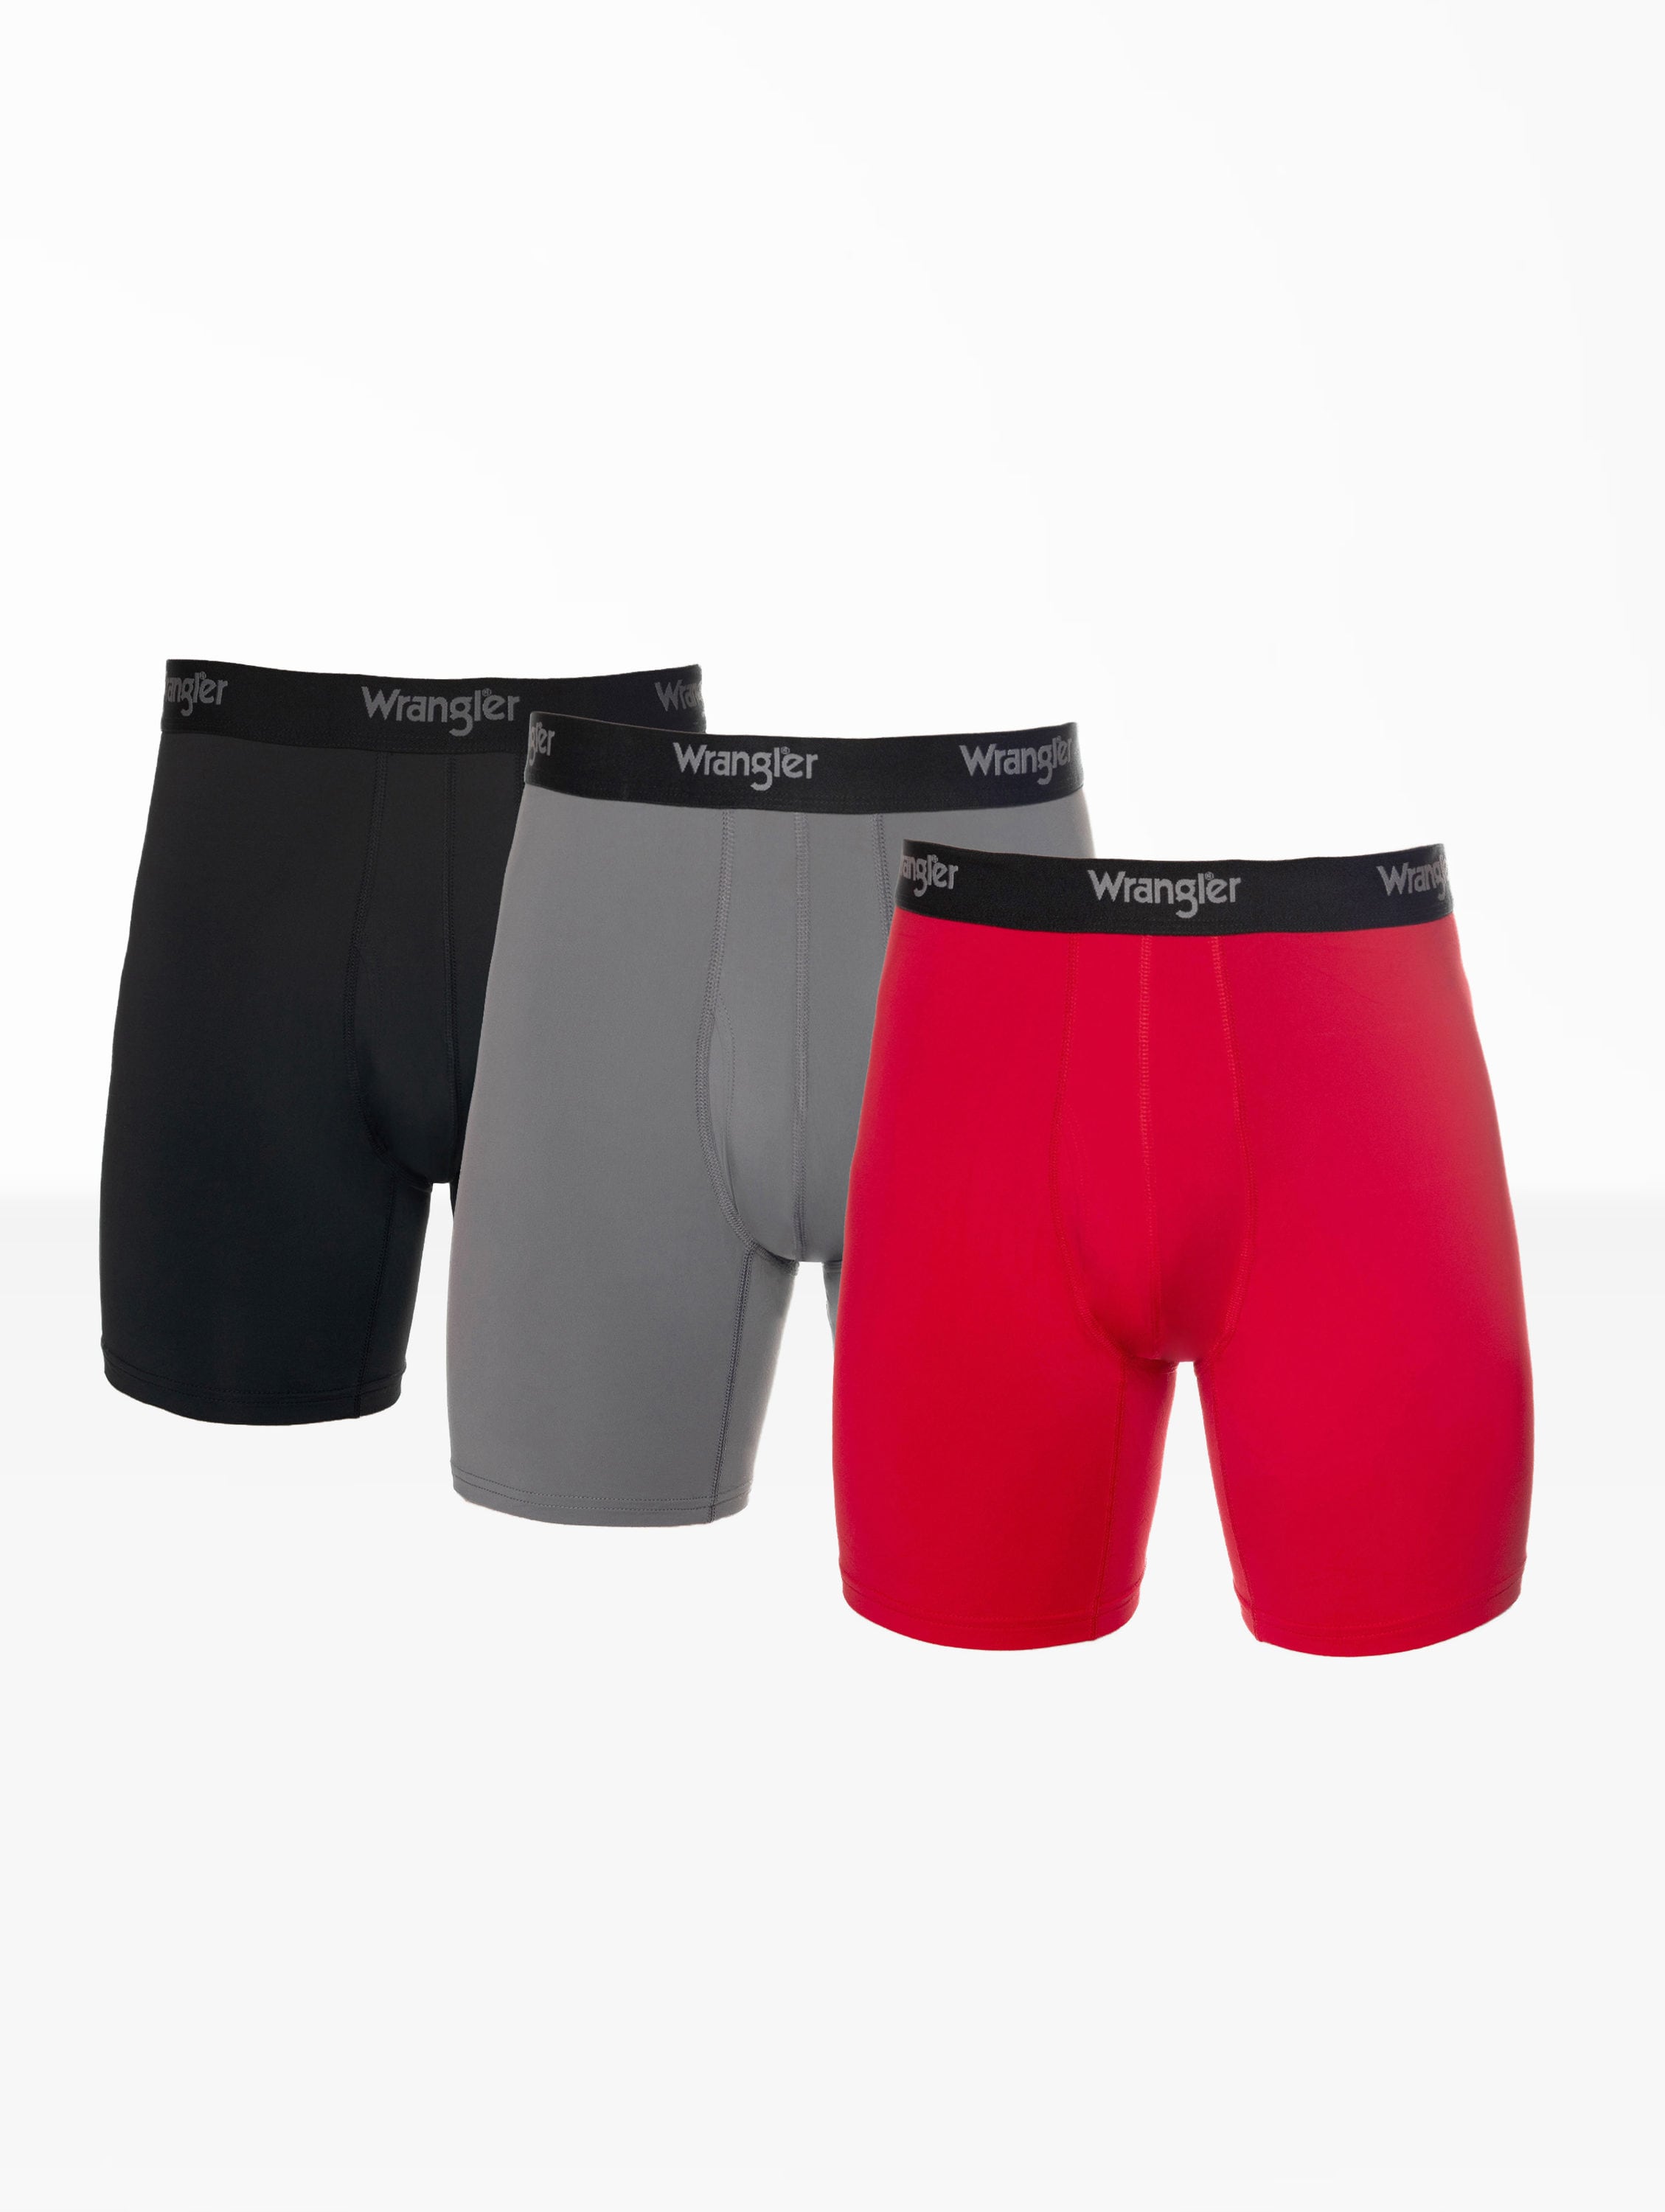 What your undies say about you - Lowes Menswear